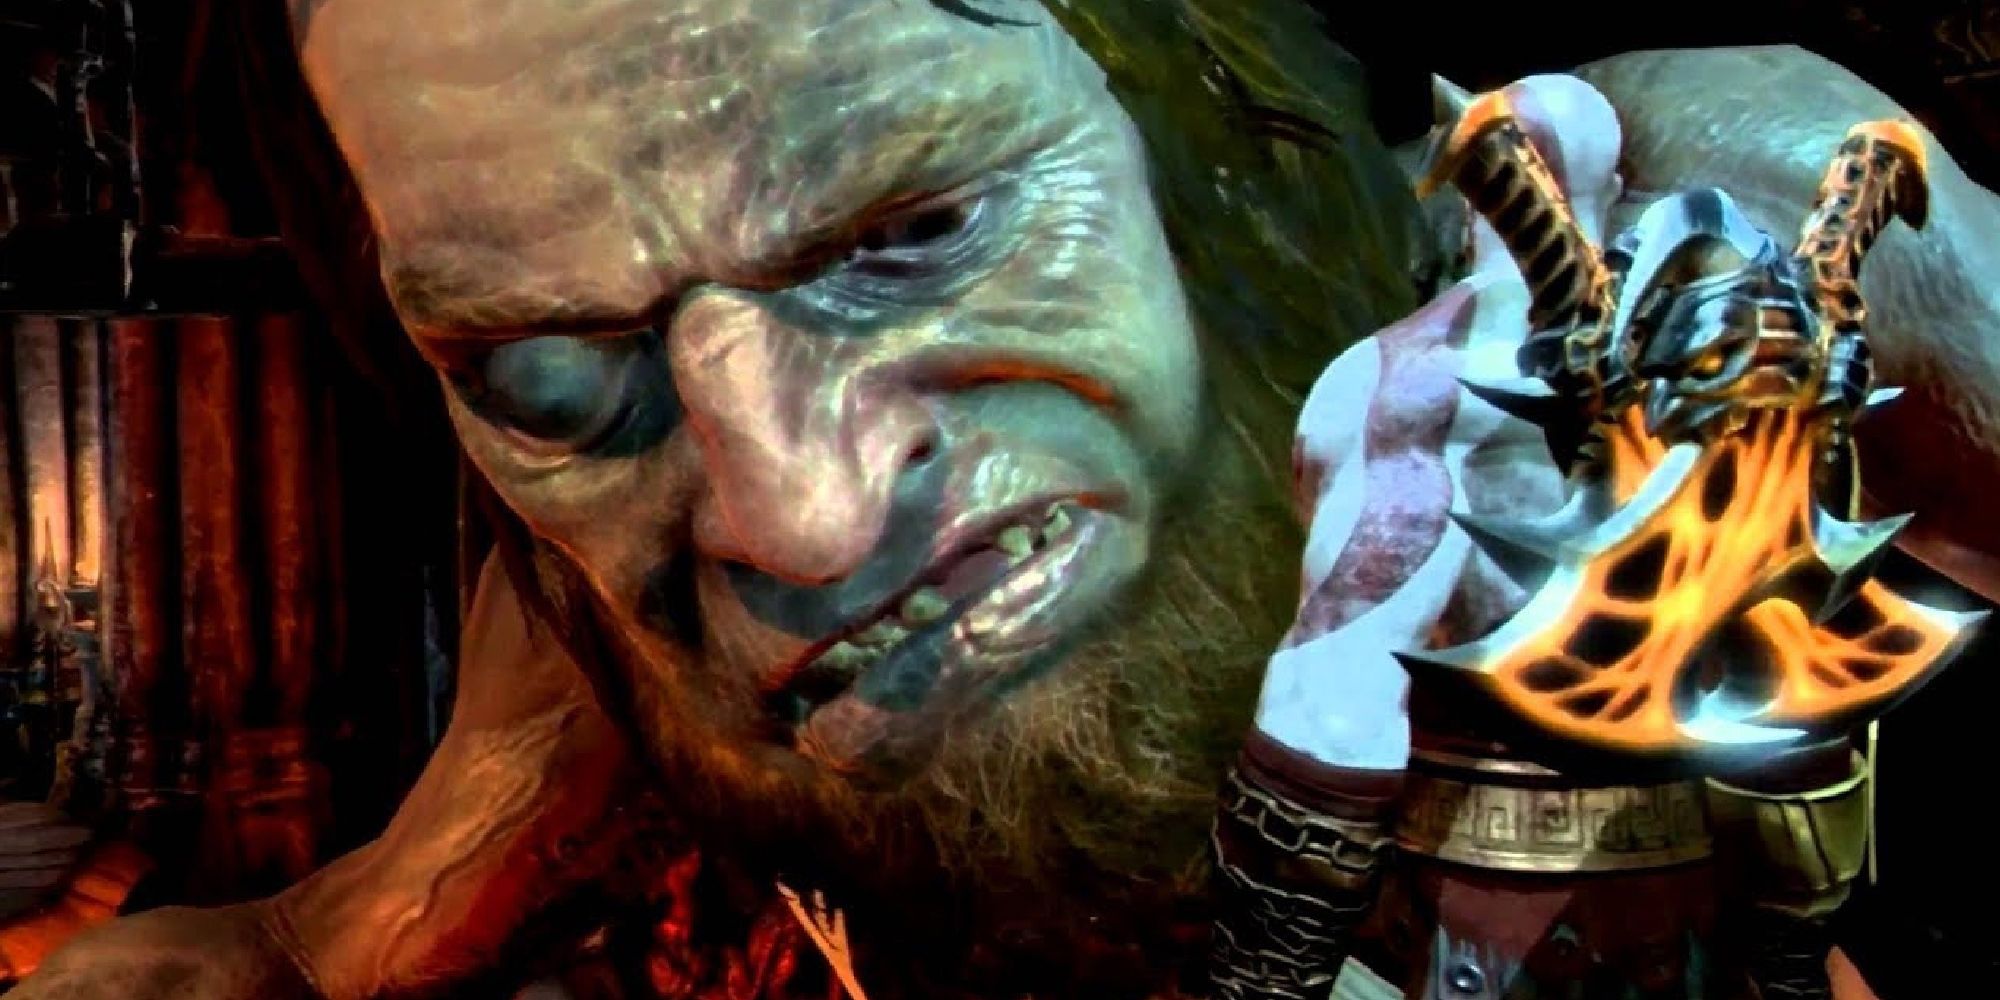 God Of War 3 - Hephaestus Getting Up Close And Personal To Talk To Kratos